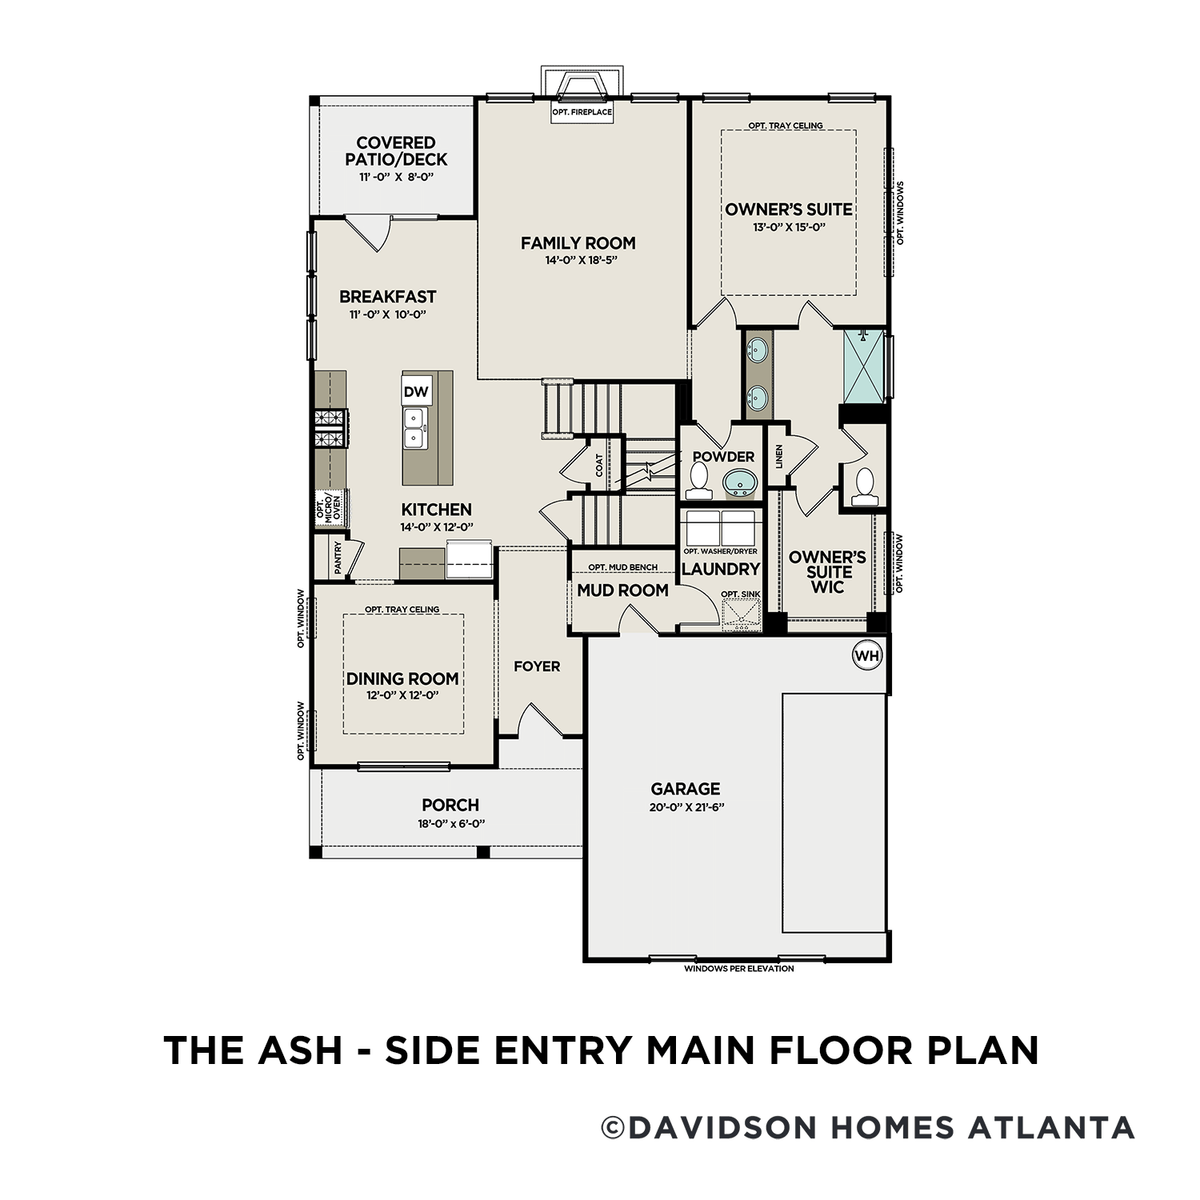 1 - The Ash A – Side Entry buildable floor plan layout in Davidson Homes' Mountainbrook community.